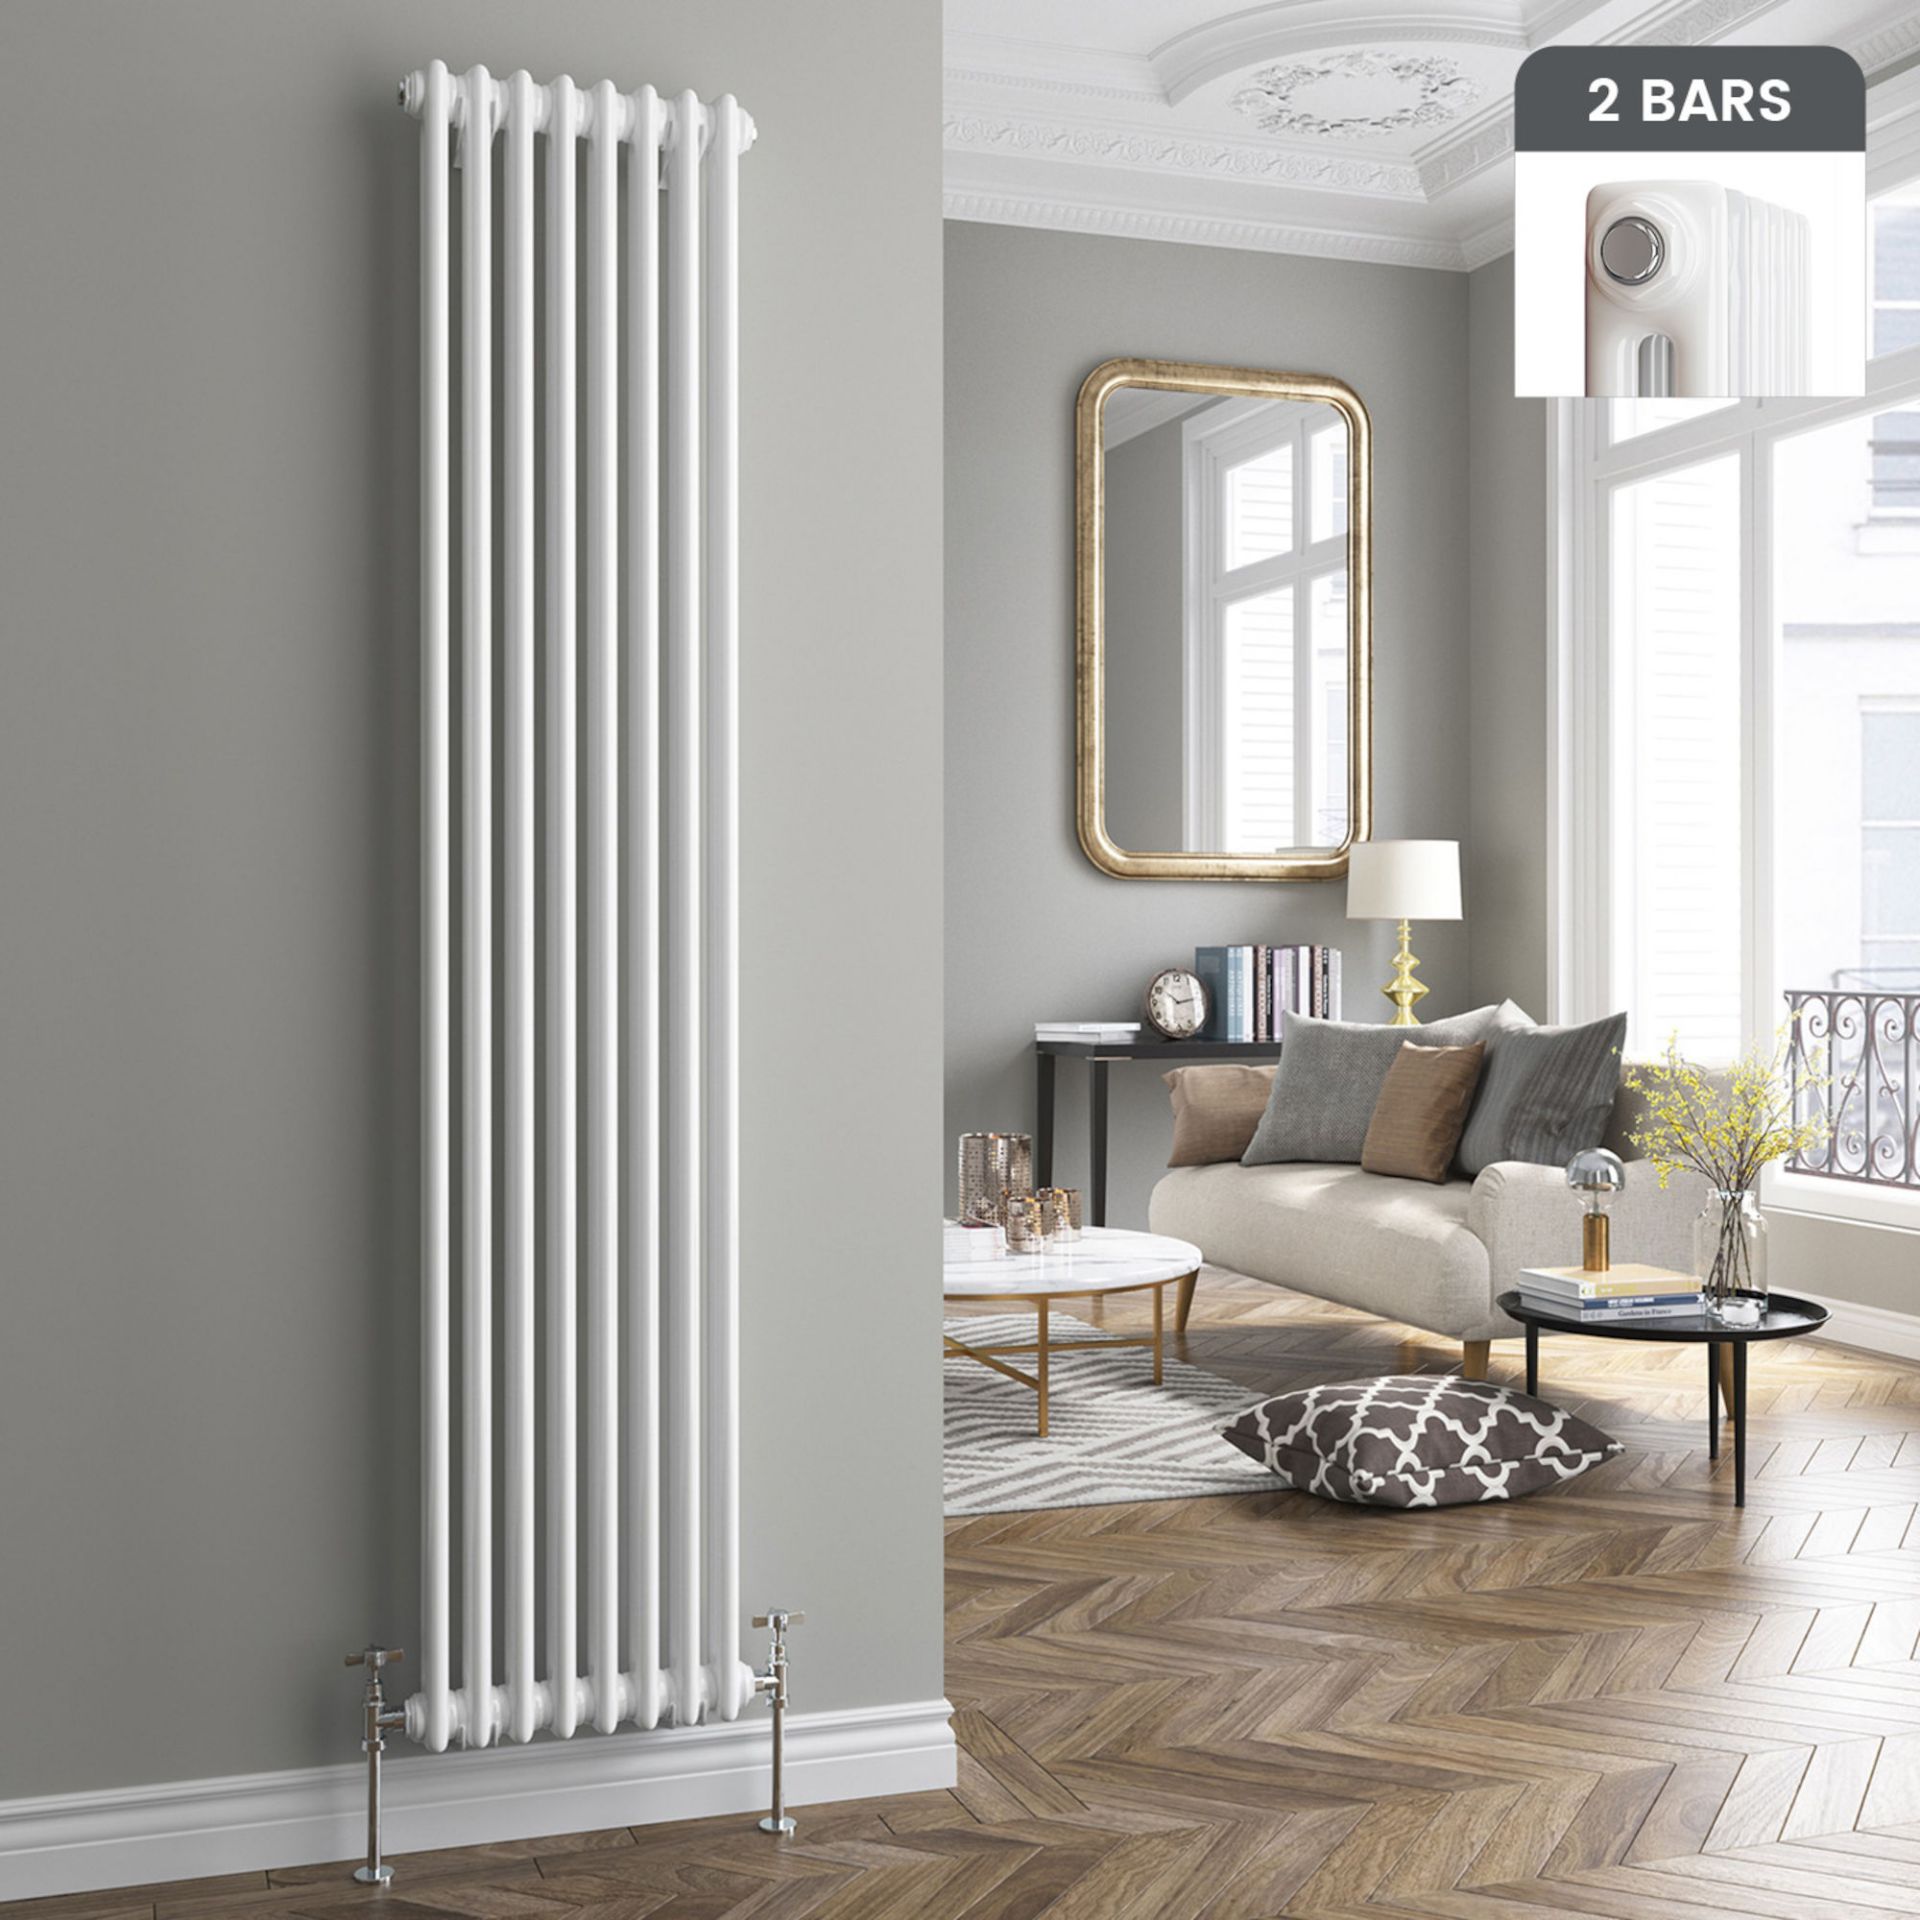 (AA19) 1800x398mm White Double Panel Vertical Colosseum Traditional Radiator. RRP £429.99. For...